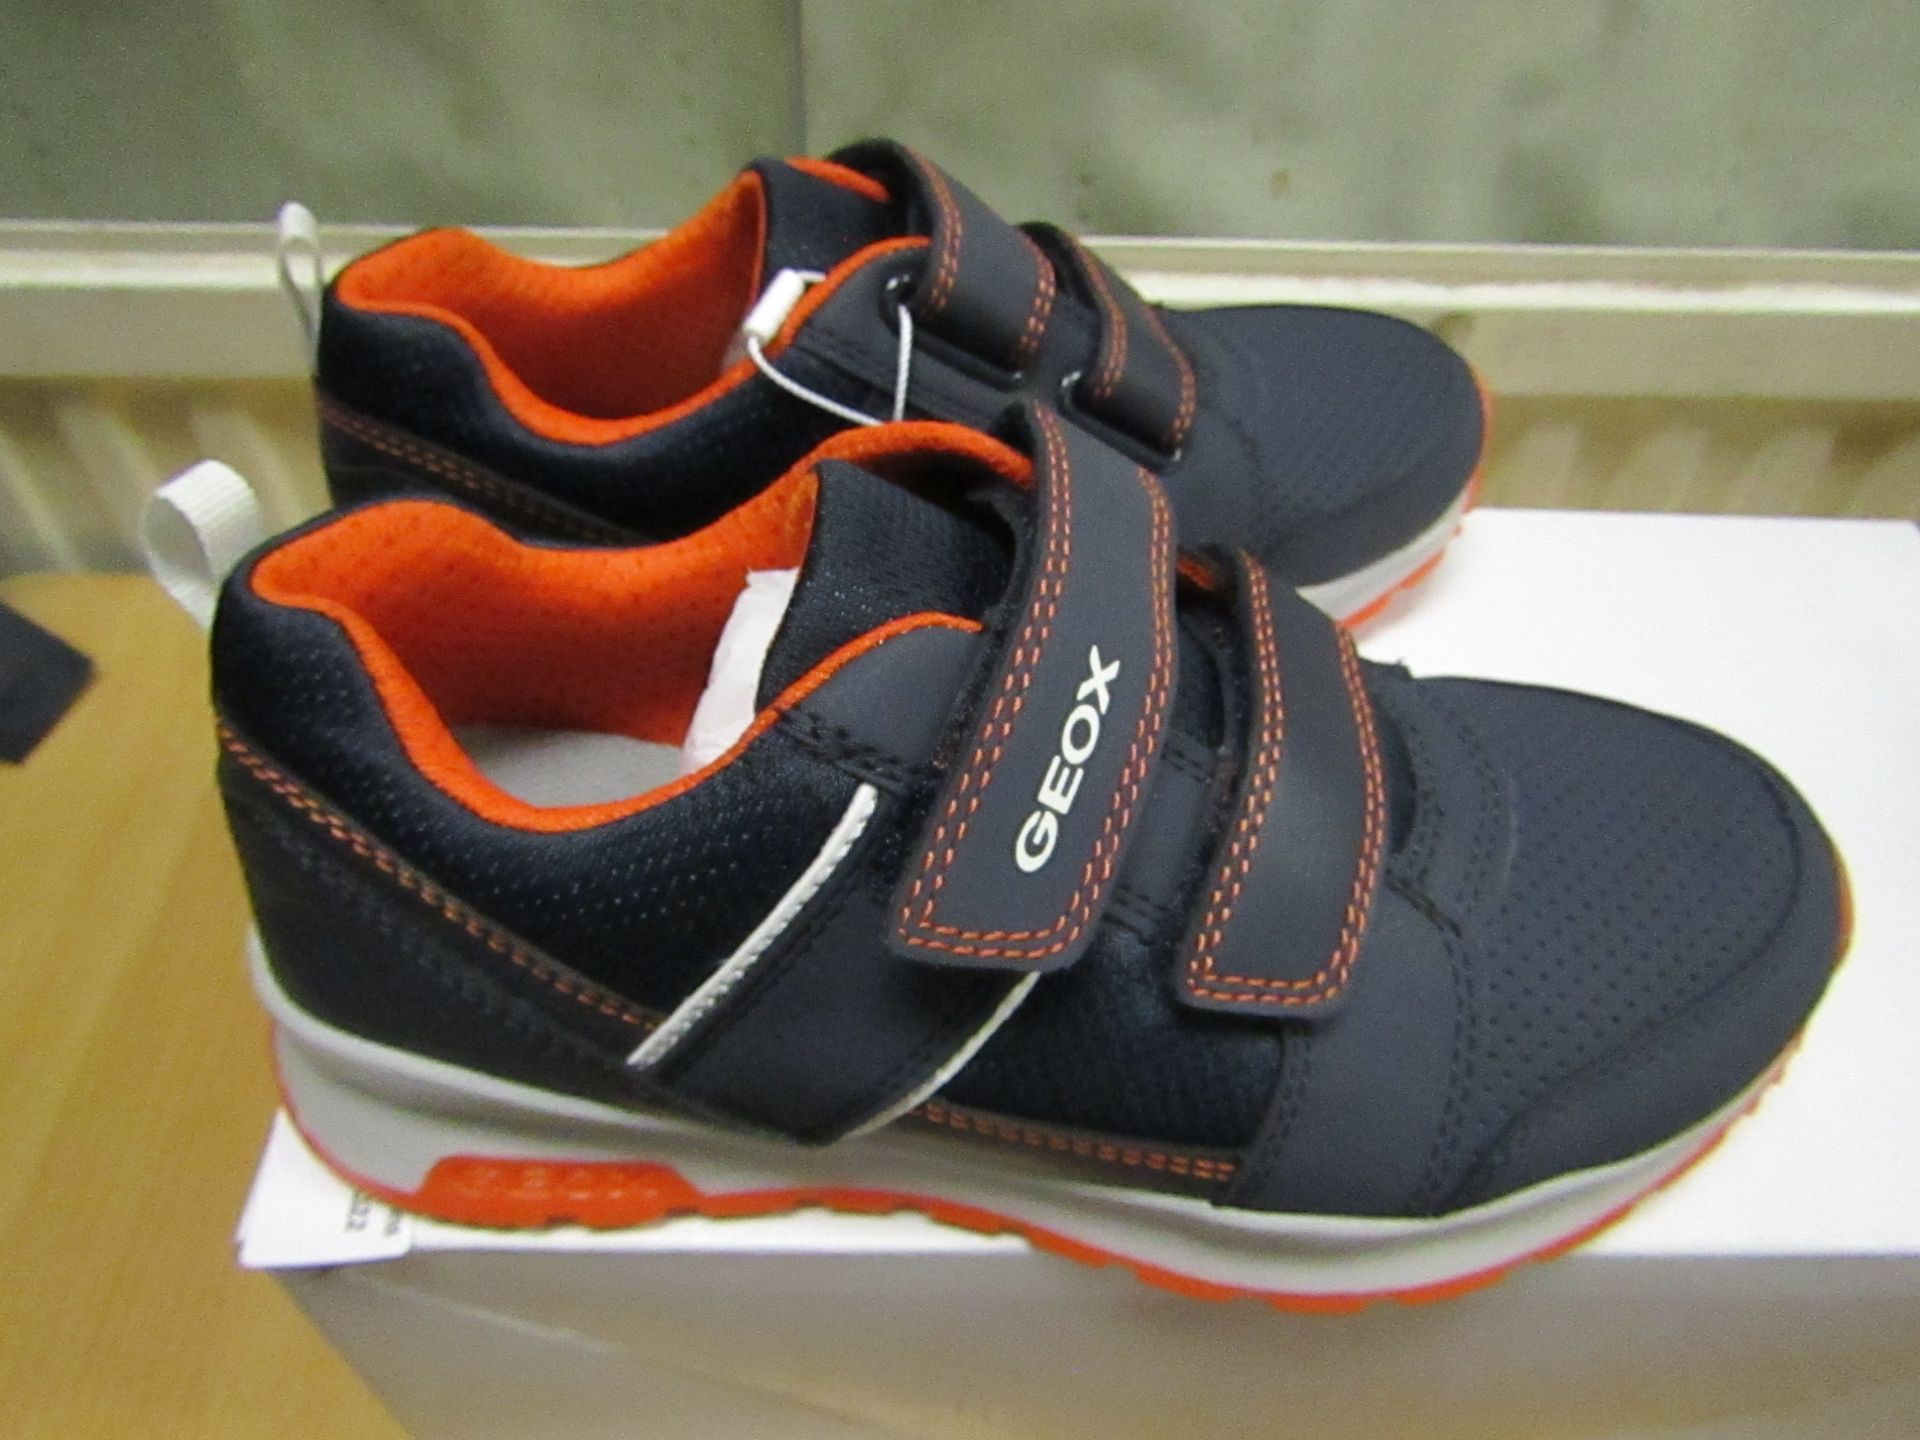 Geox Respira Childrens Trainer Size 13 New & Boxed